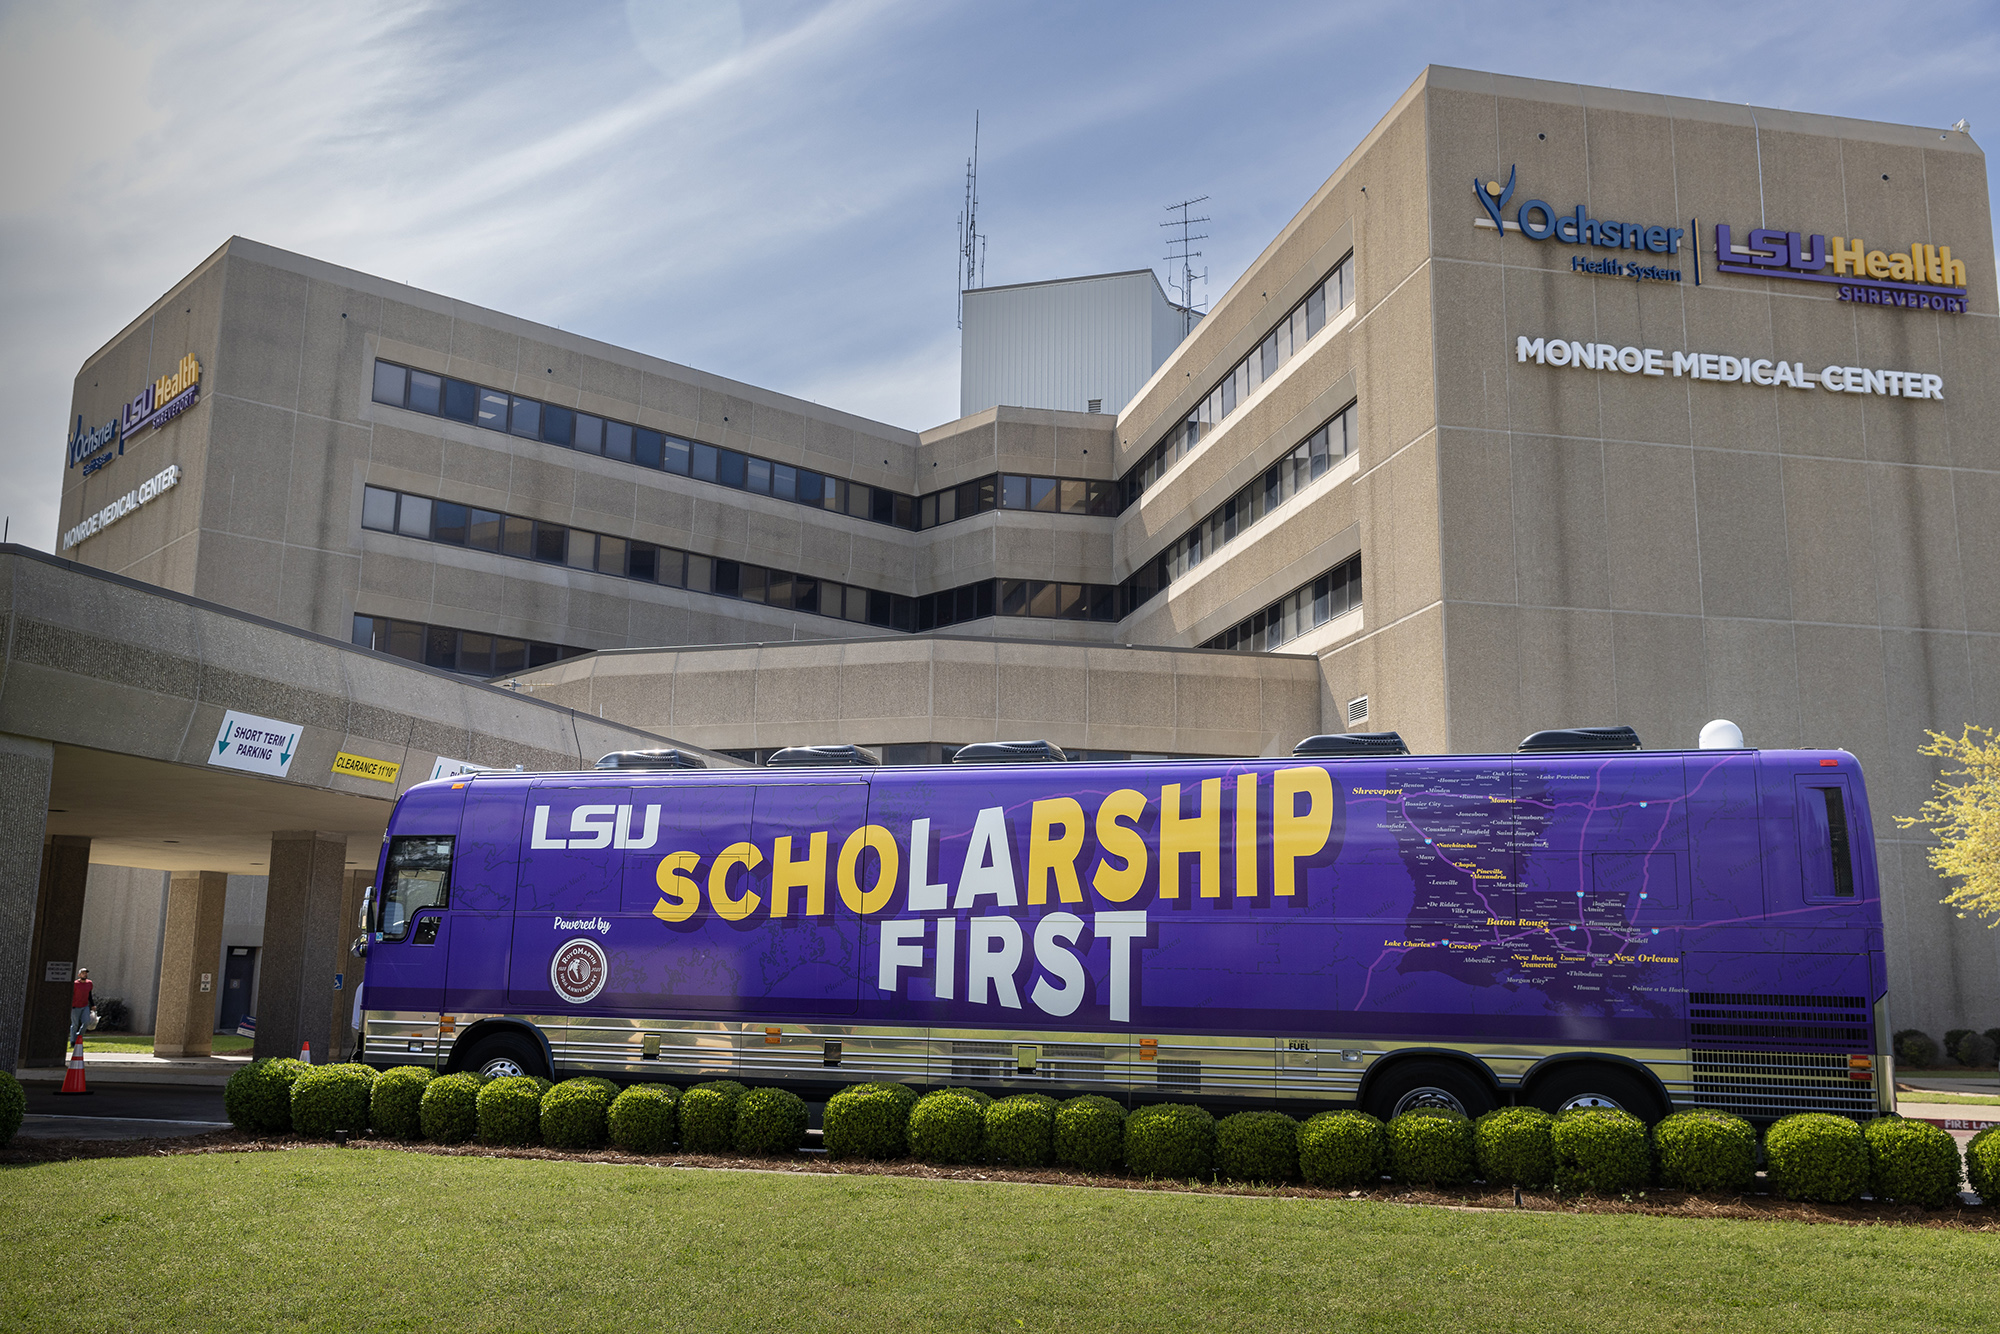 Scholarship First bus in front of Monroe Medical Center